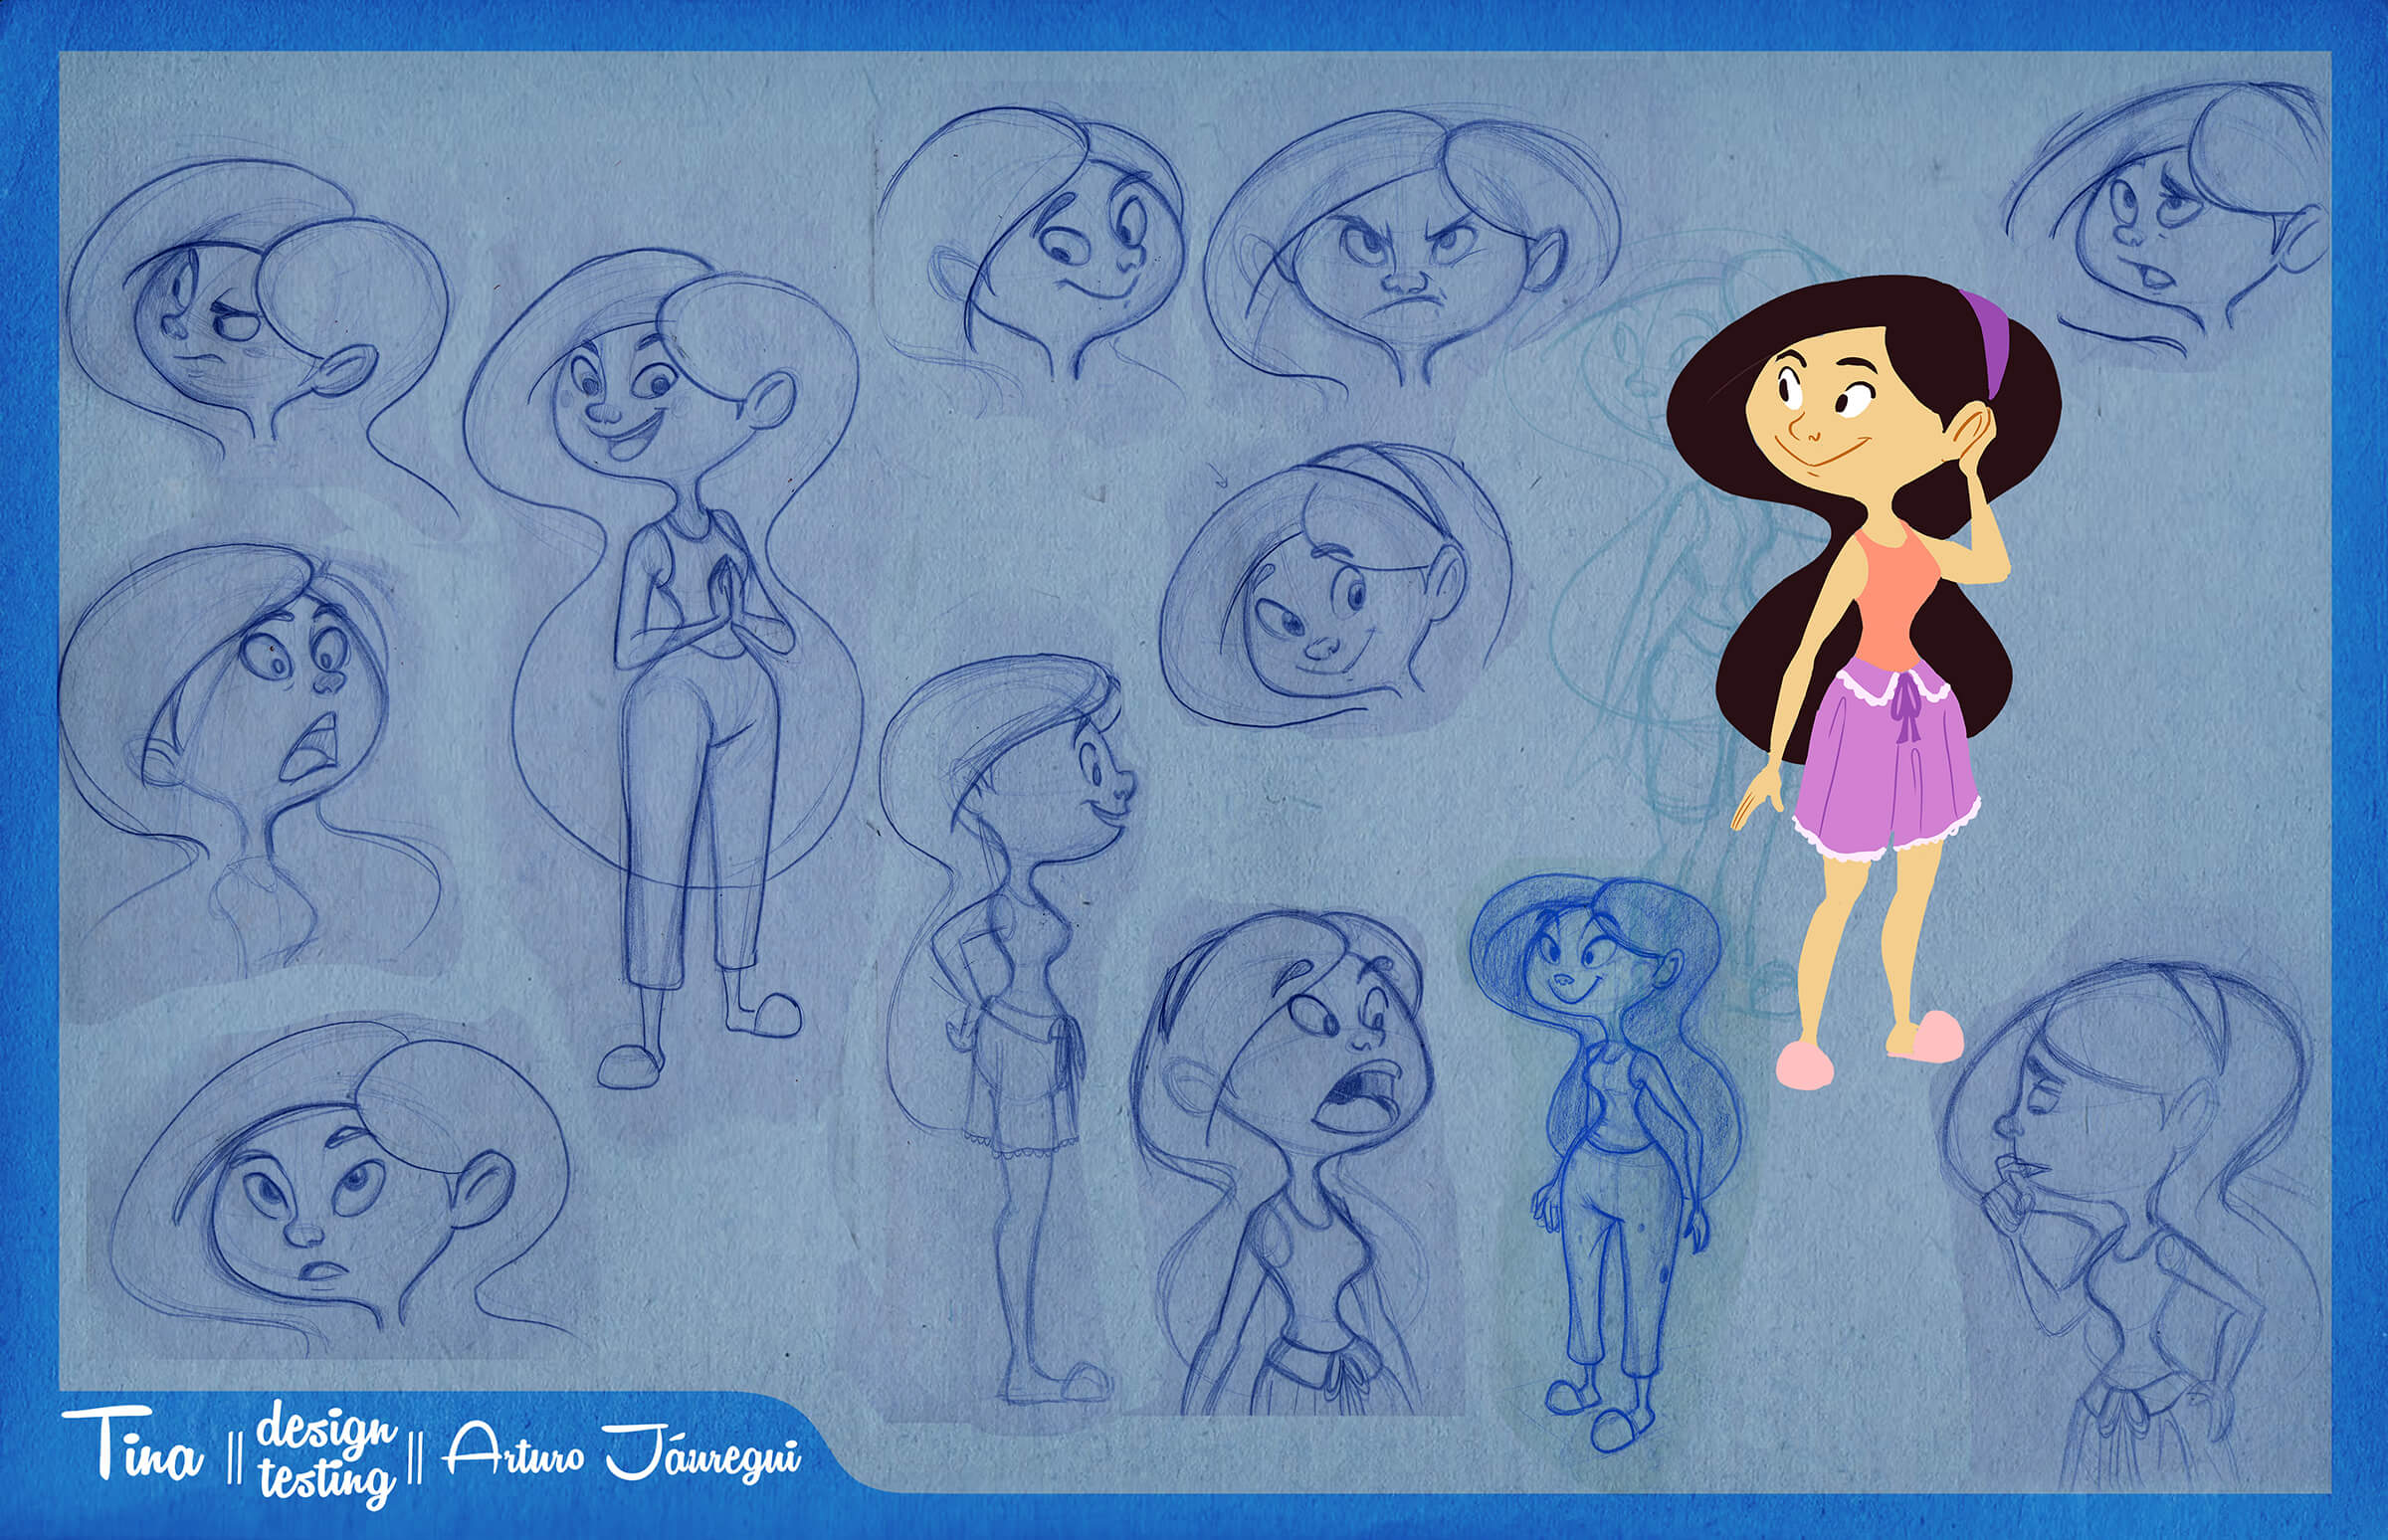 digital painting of the various facial expressions and gestures of a character named Tina with long black hair